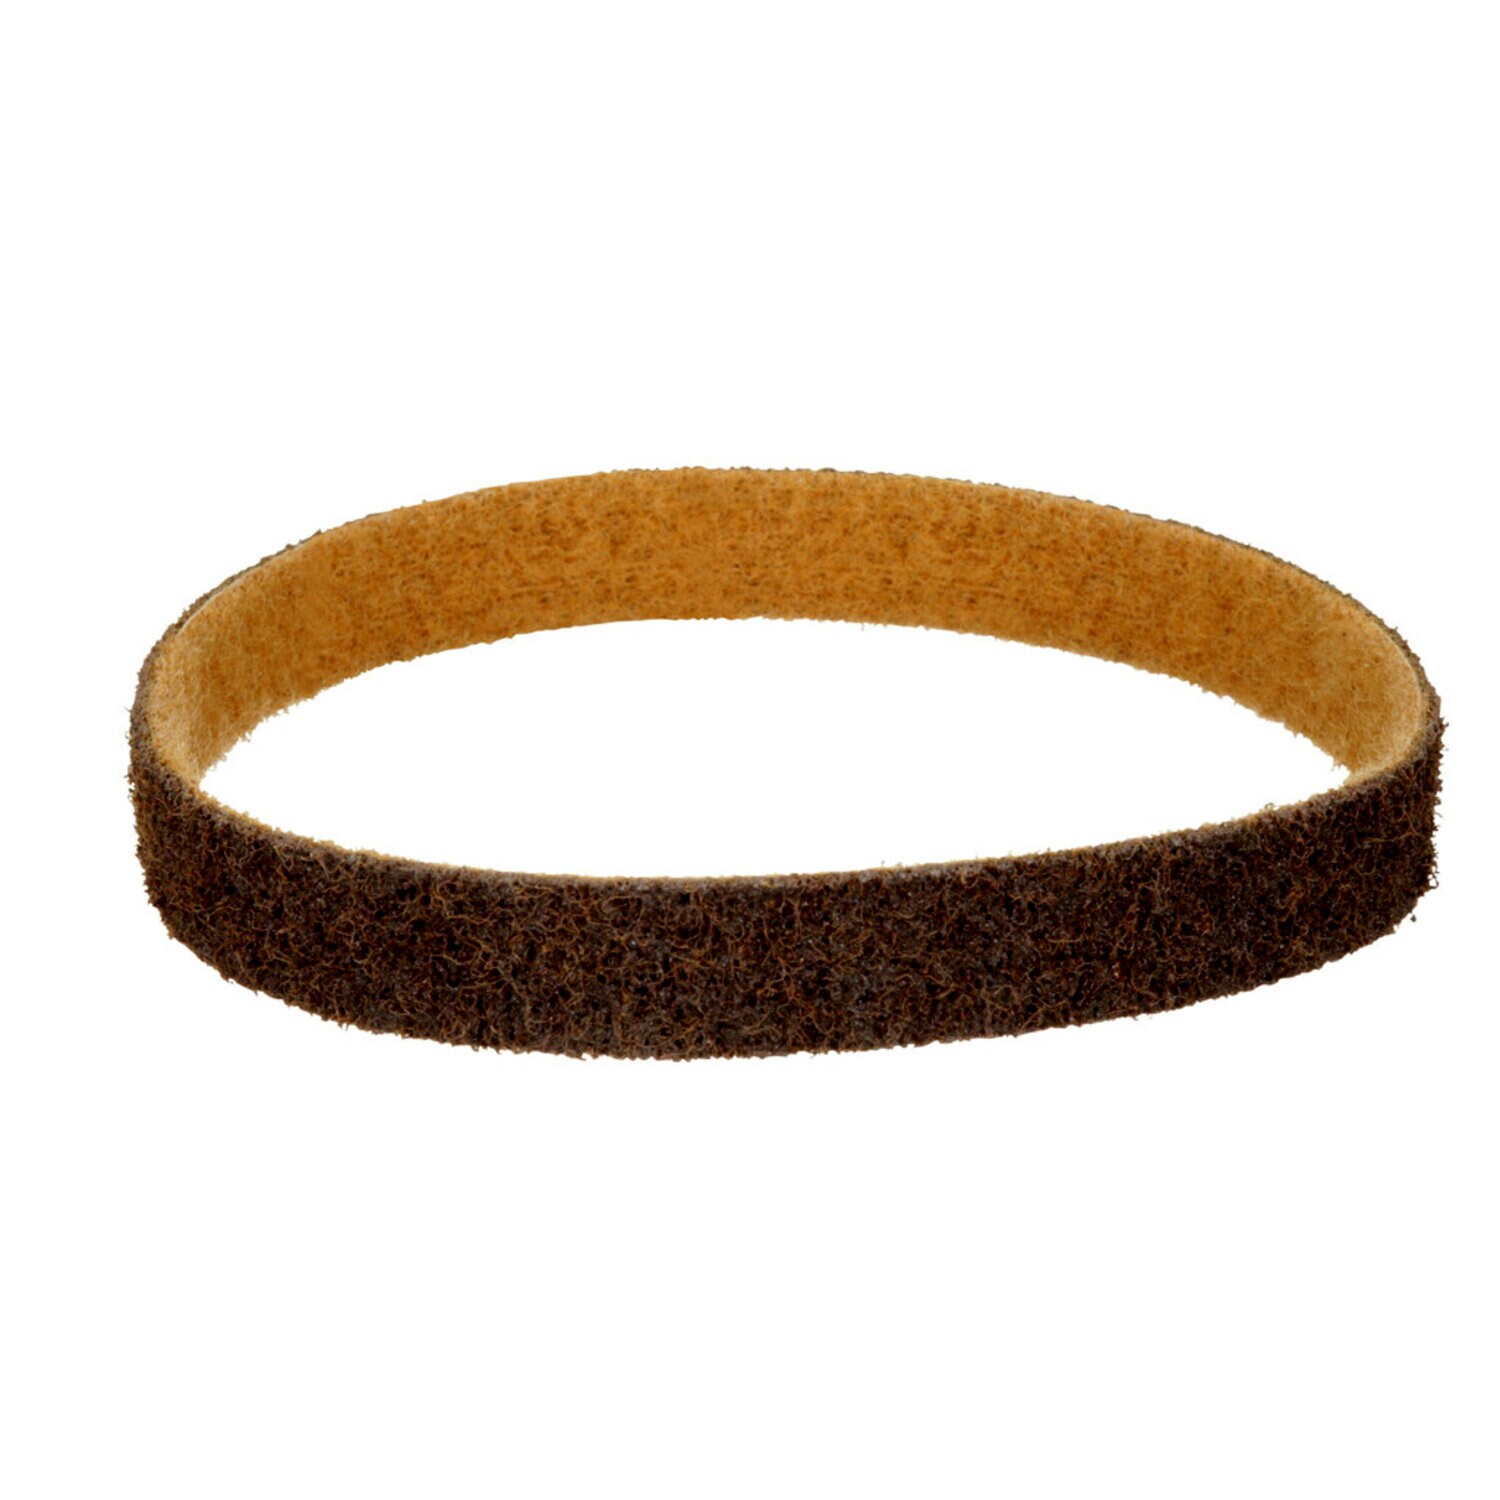 7000121948 - Standard Abrasives Surface Conditioning RC Belt 888056, 3/4 in x 18 in
CRS, 10 ea/Case